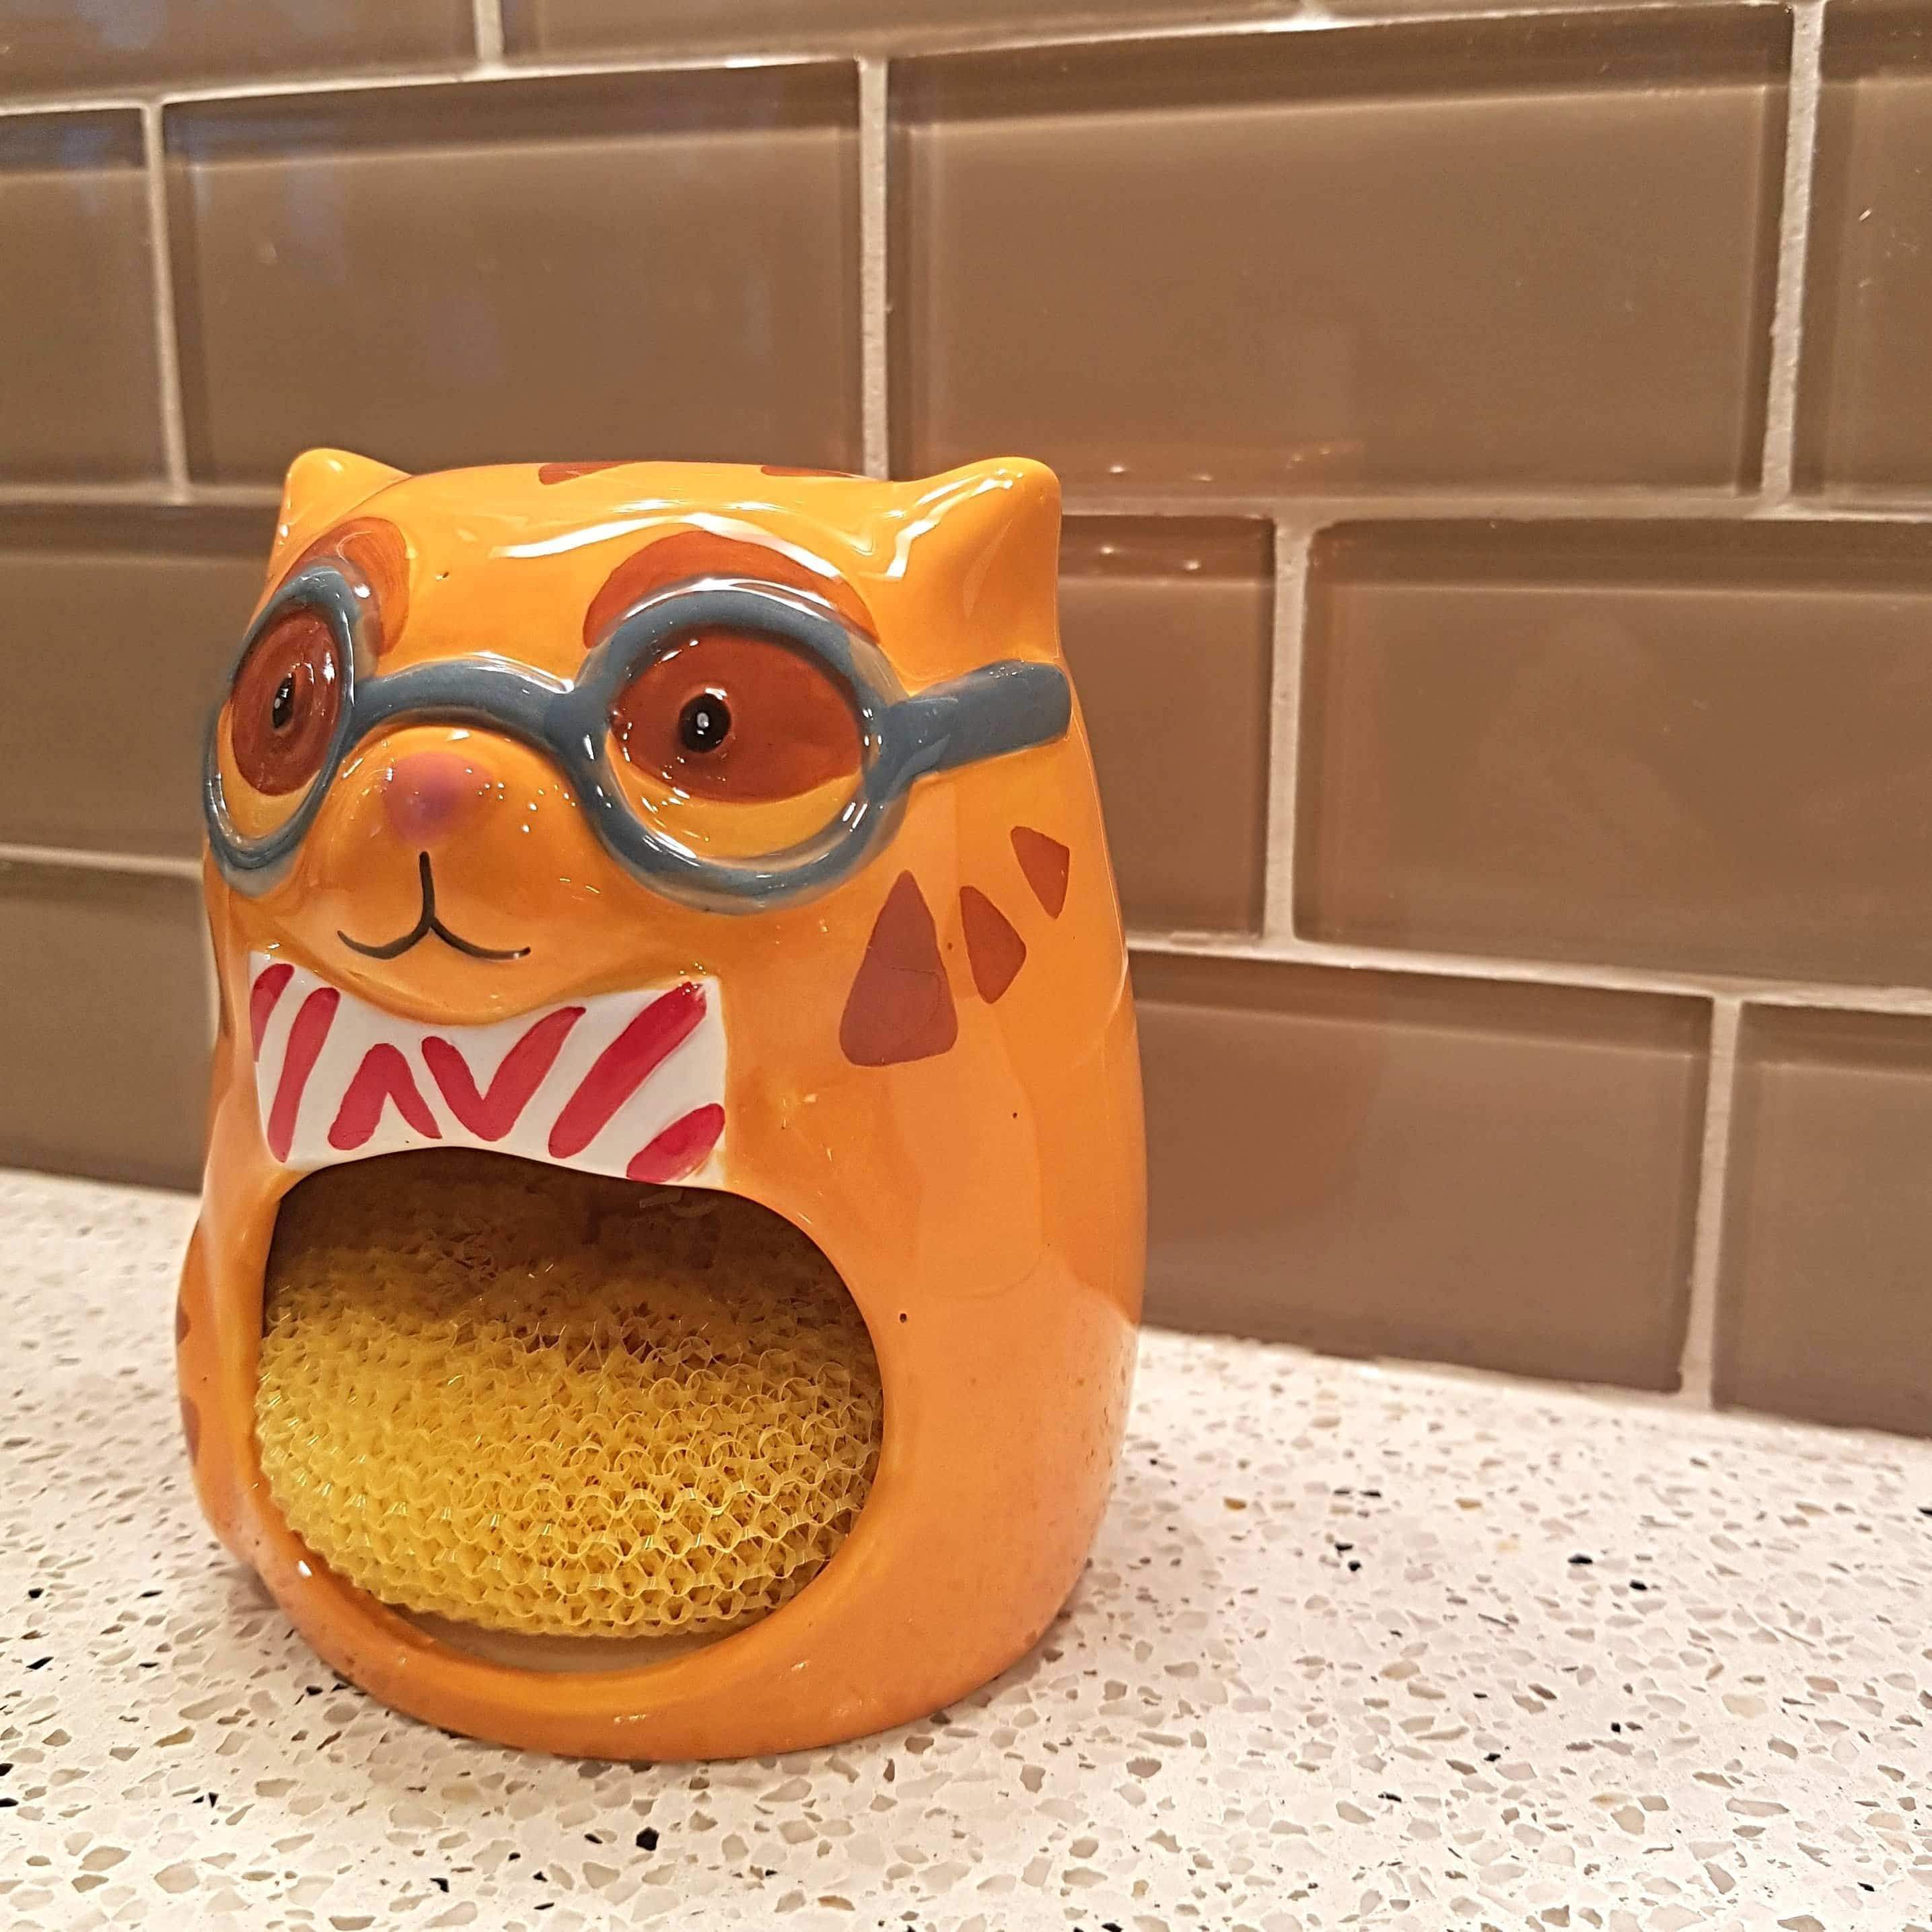 Quirky Gifts for Cat Lovers, Cat Shaped Sponge Holder